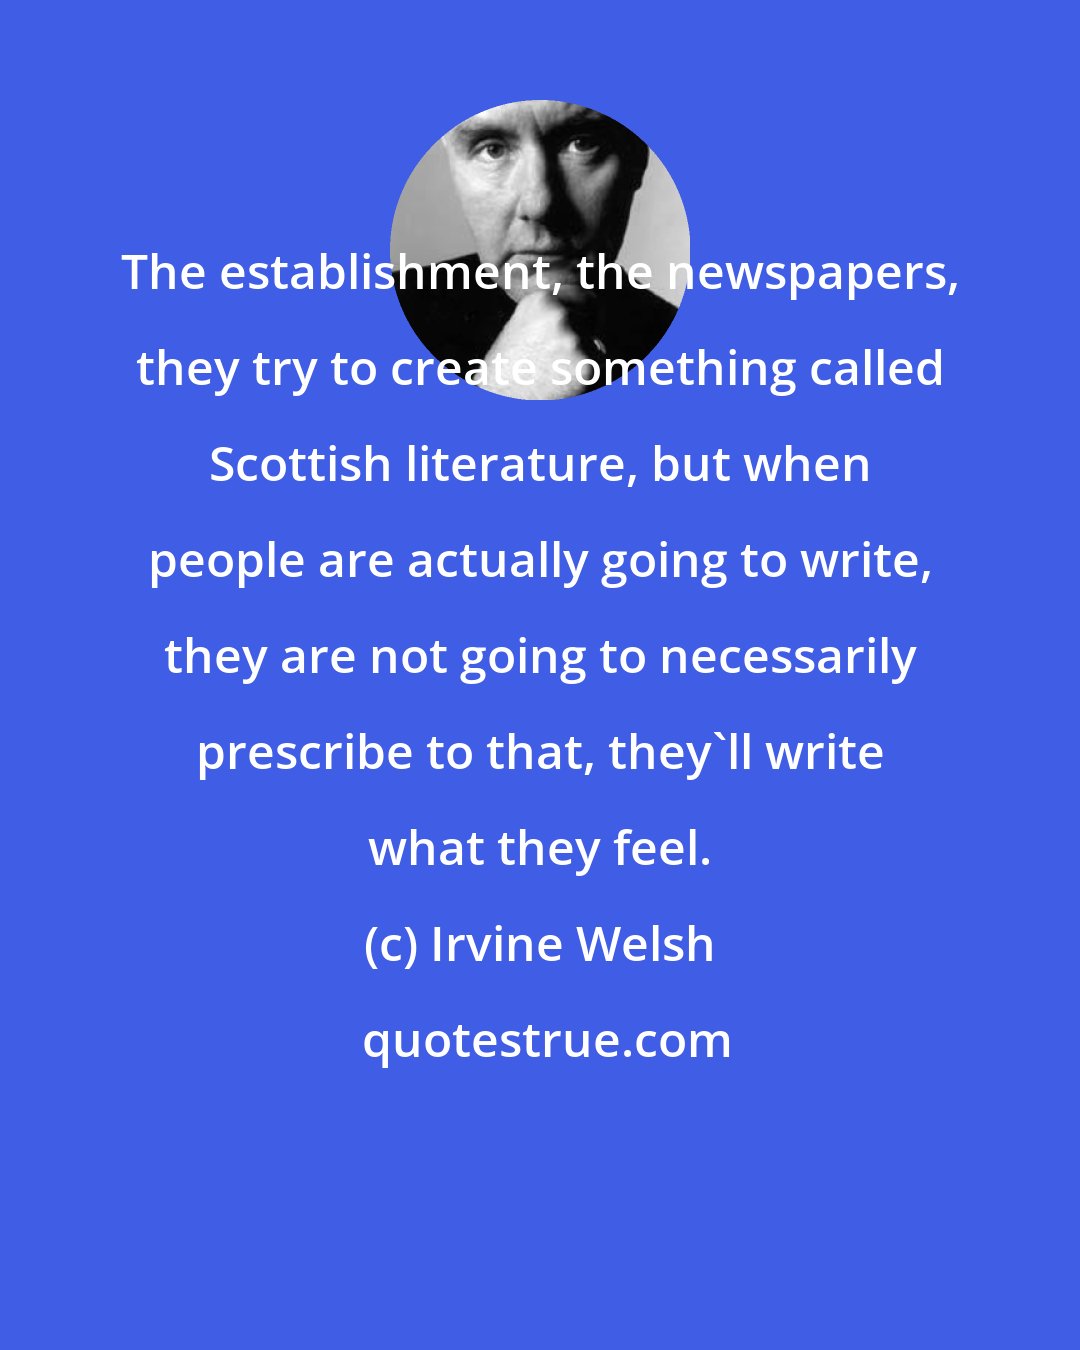 Irvine Welsh: The establishment, the newspapers, they try to create something called Scottish literature, but when people are actually going to write, they are not going to necessarily prescribe to that, they'll write what they feel.